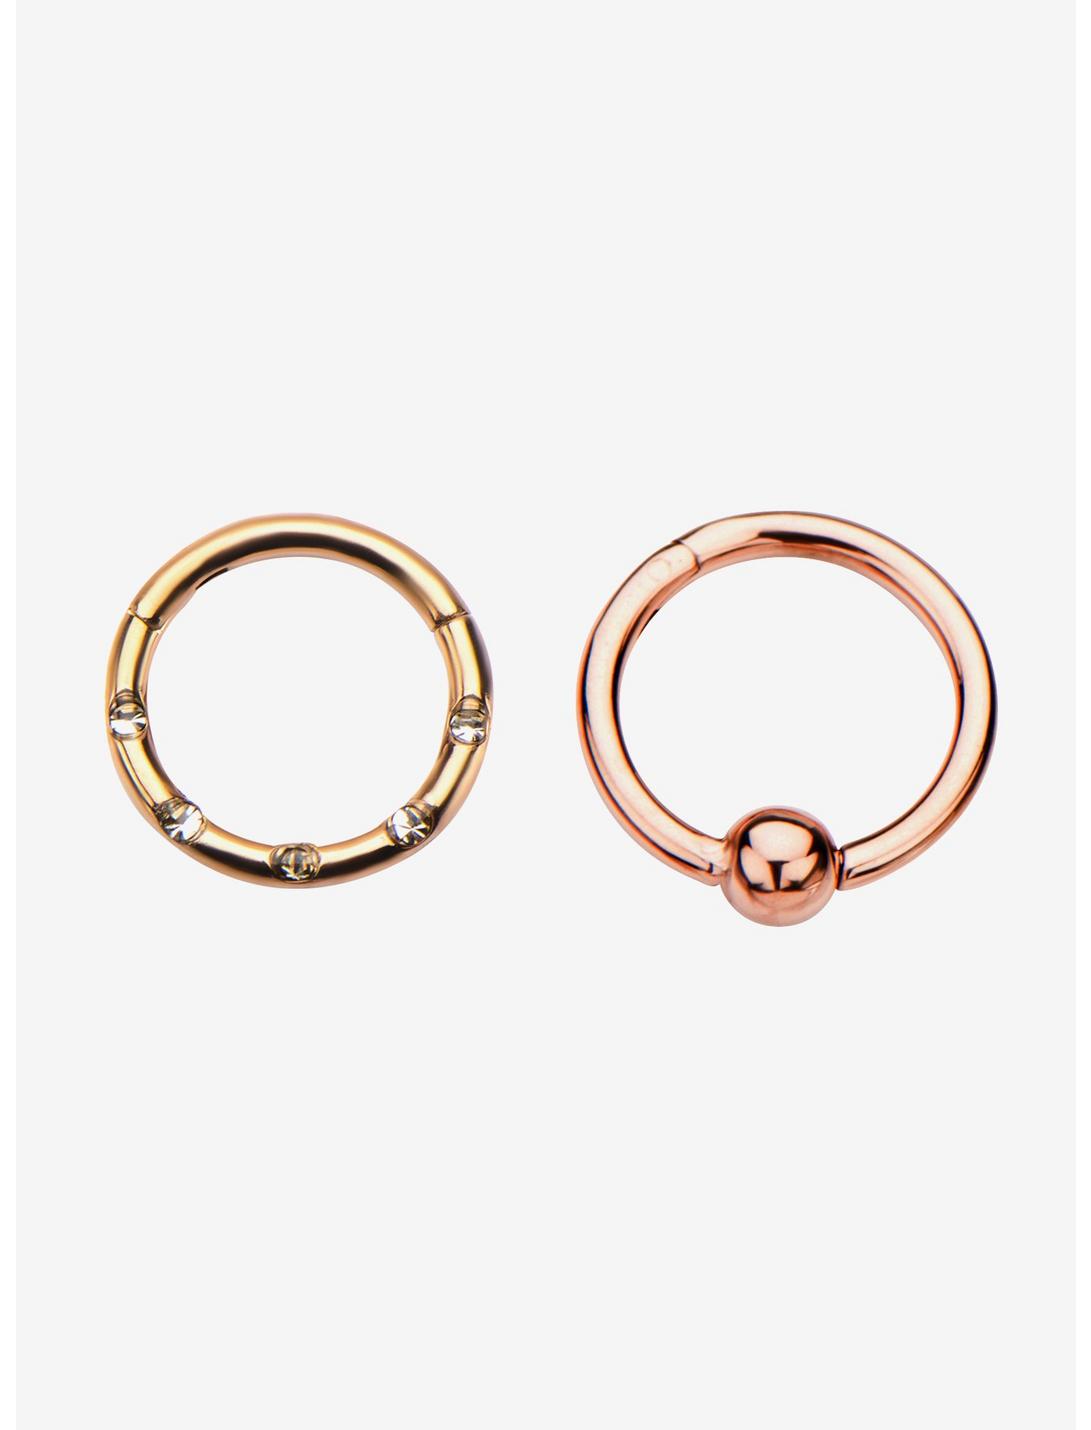 Rose Gold Hinged Segment Rings With 5 Clear And Plain Hinged Segment Ring Set, , hi-res